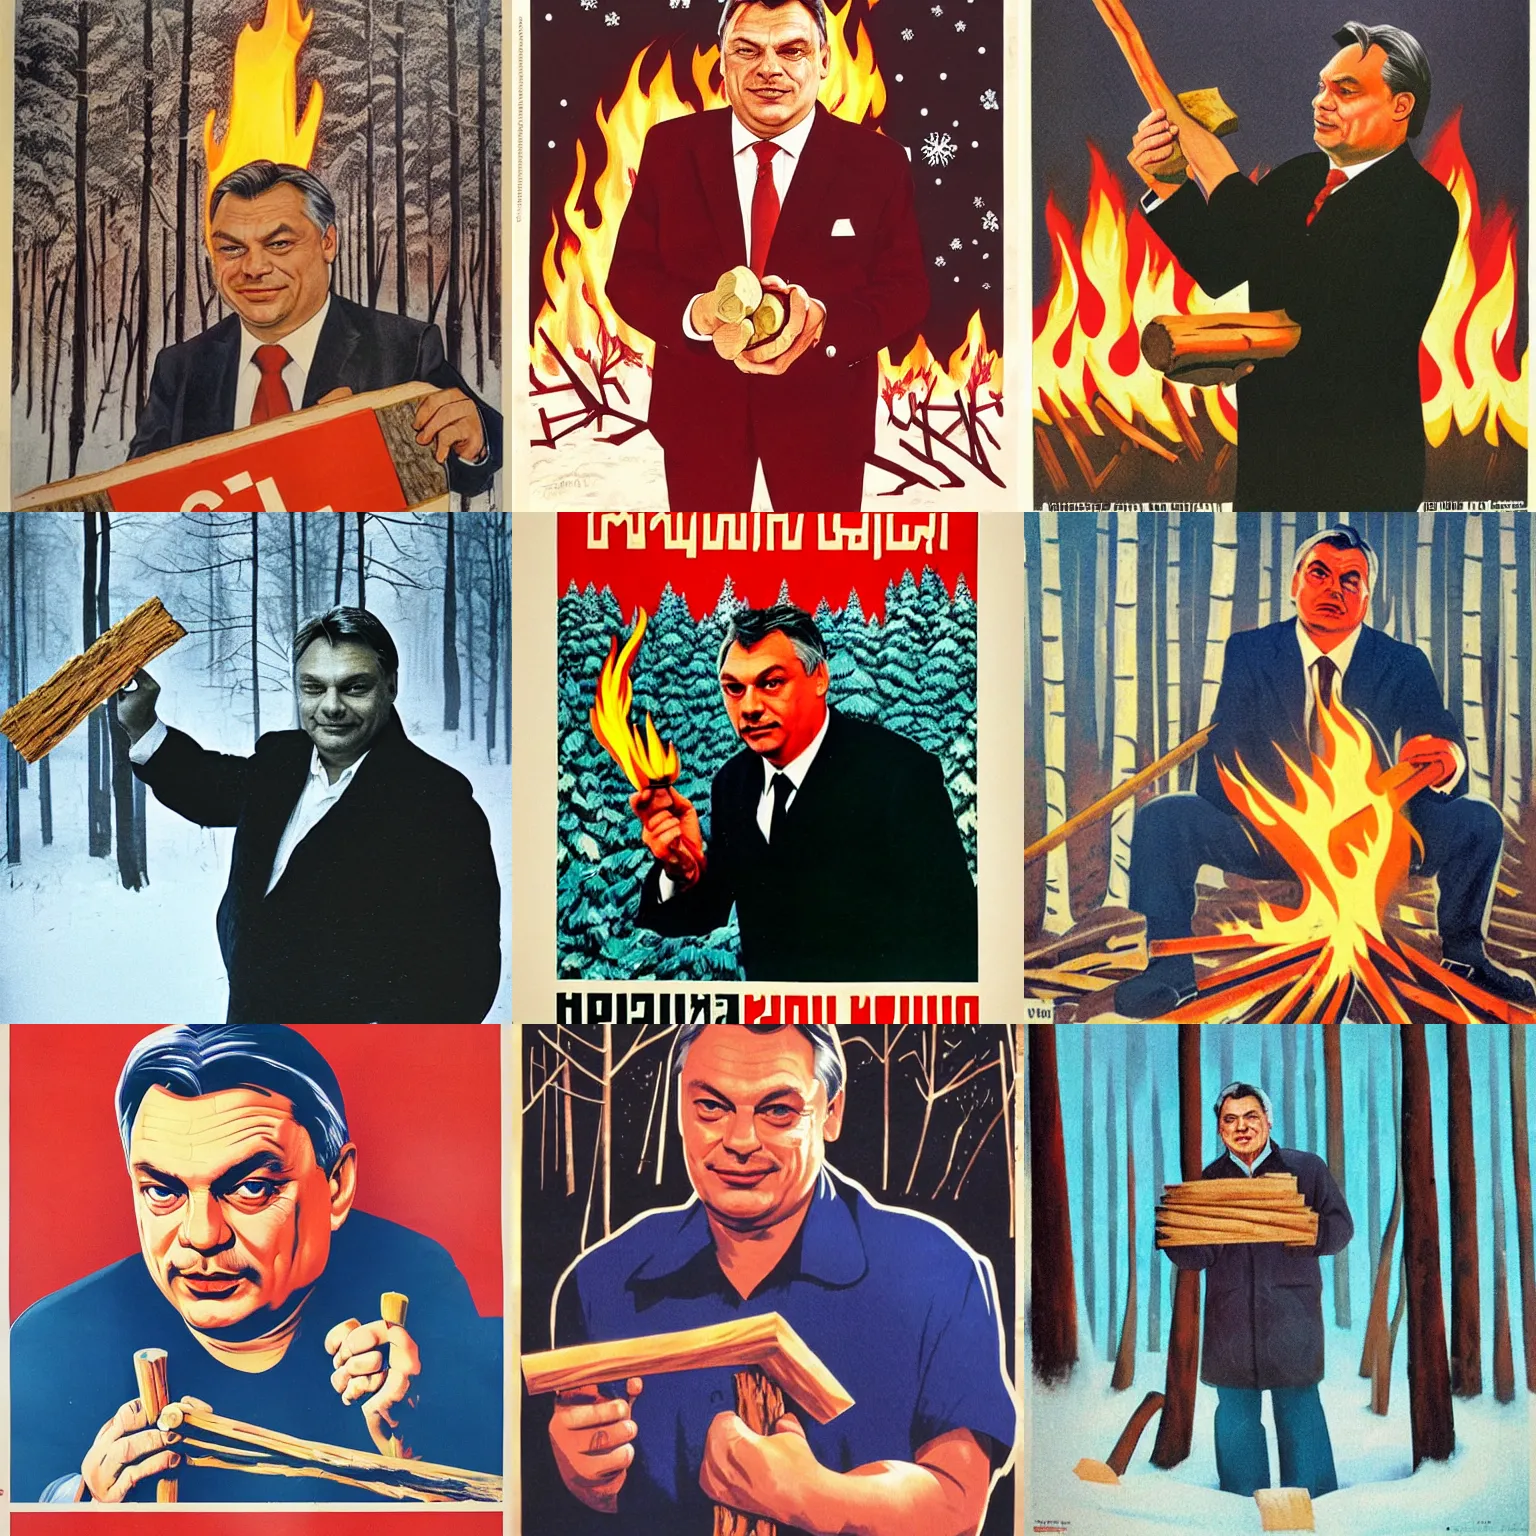 Prompt: soviet poster of viktor orban, holding a burning wood piece, winter forest in background